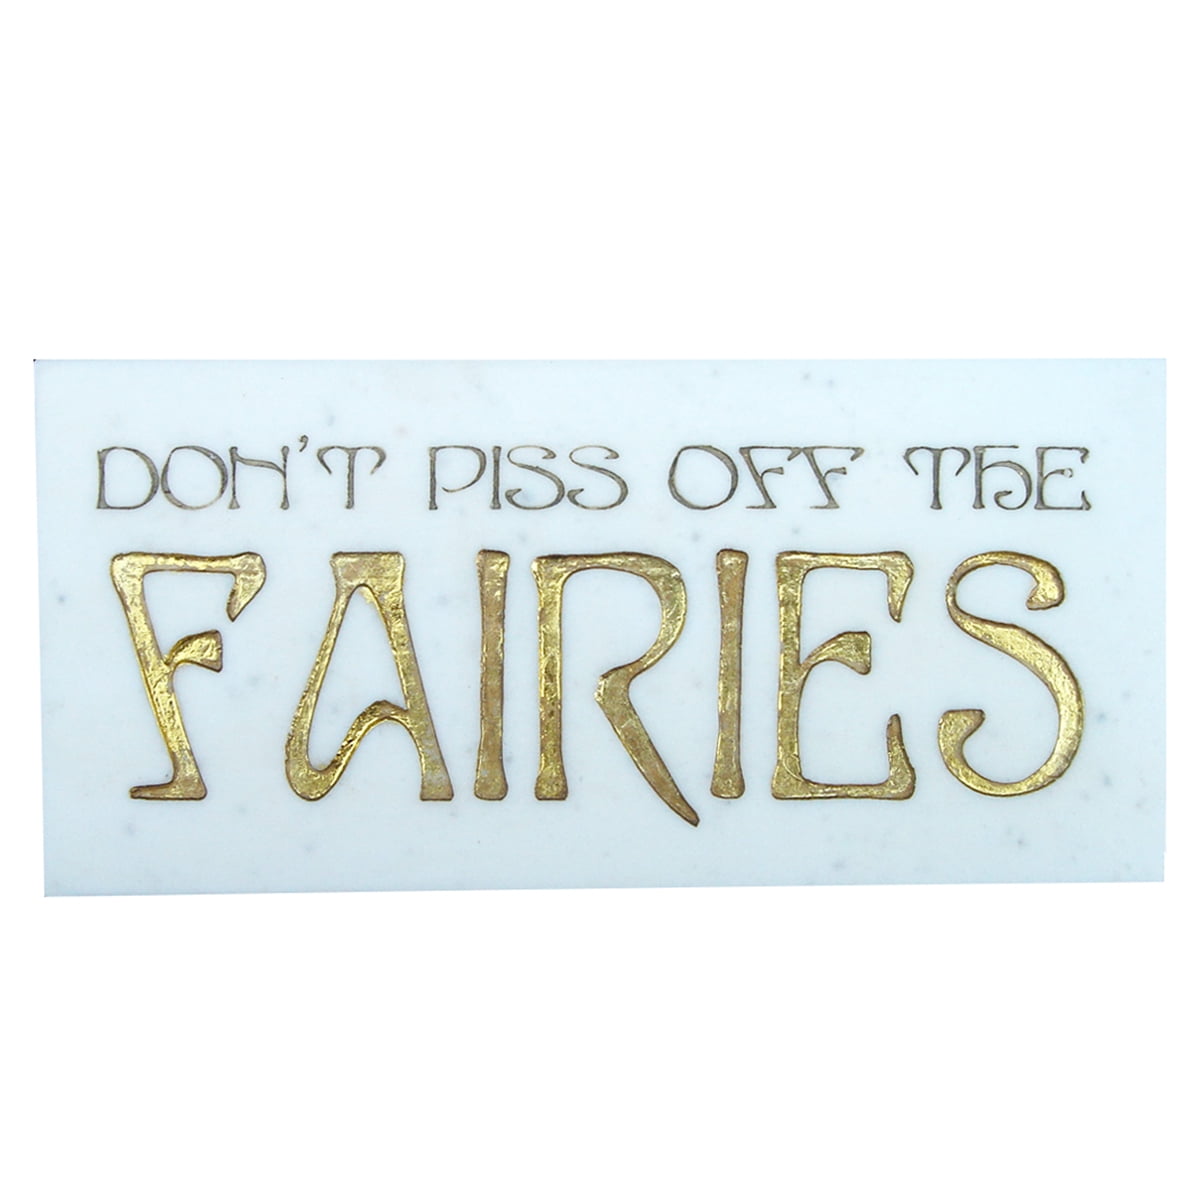 Dont piss off the fairies